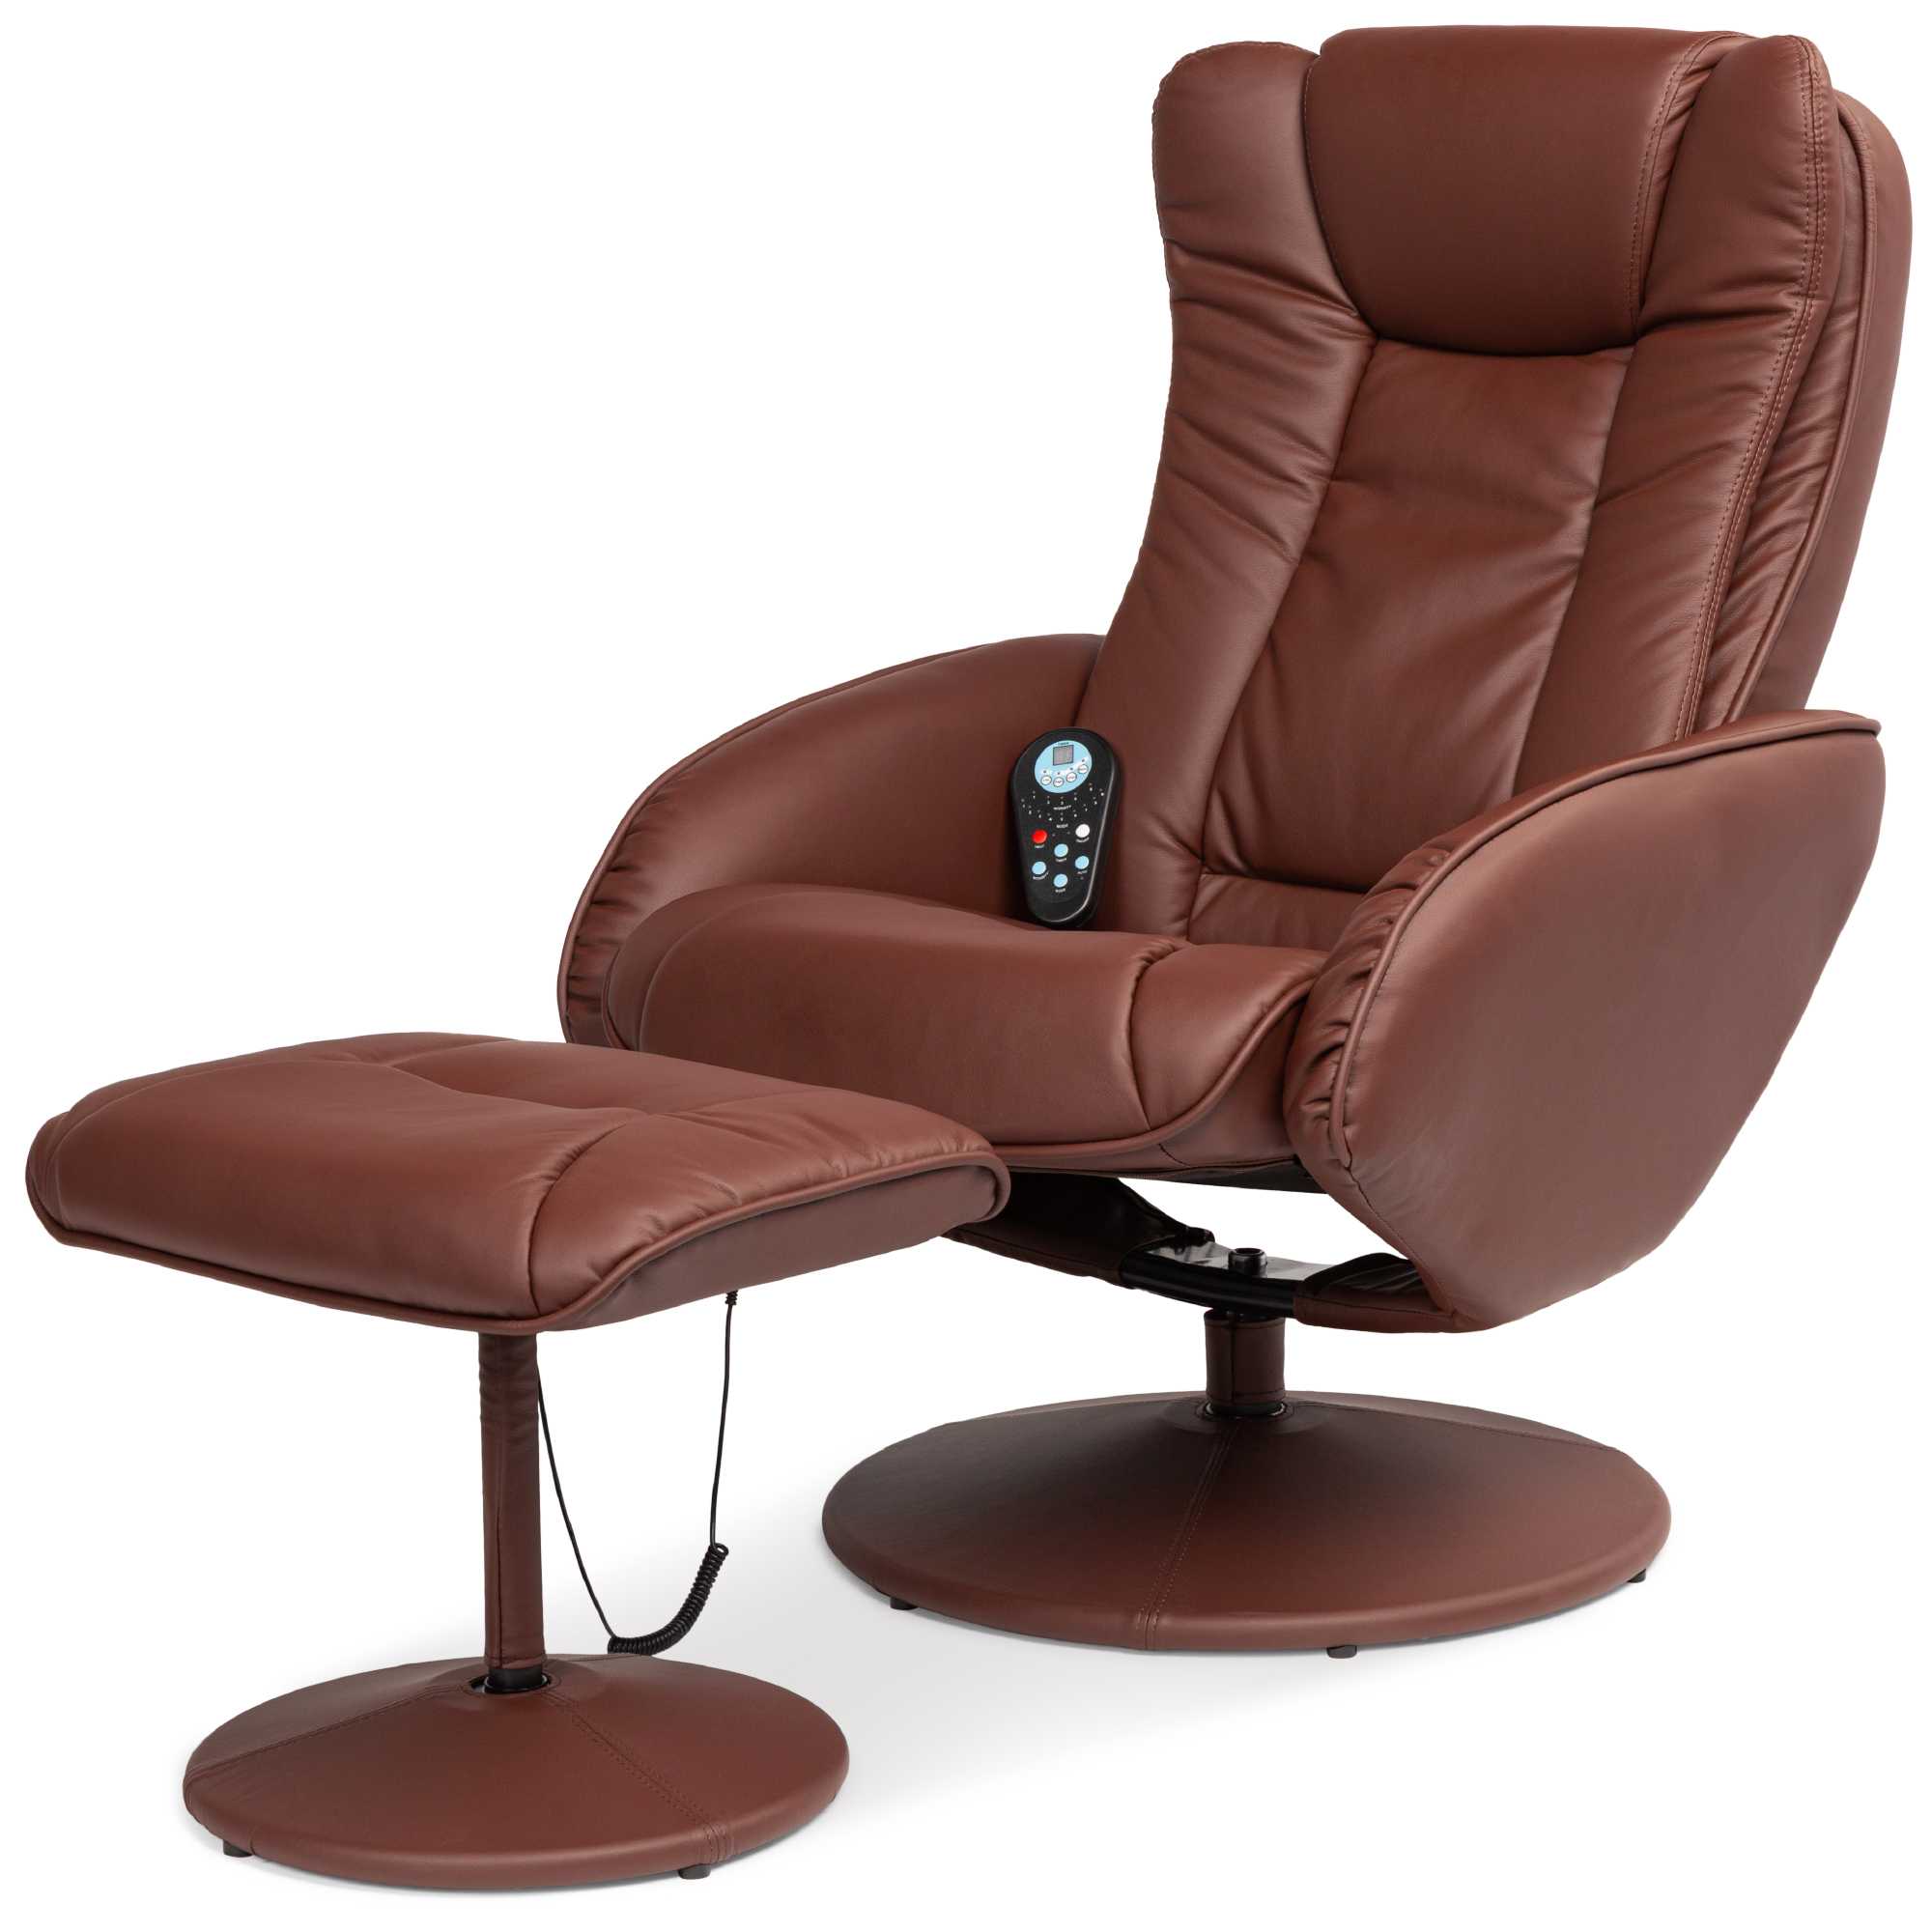 Electric Massage Recliner Chair, Faux Leather w/ Stool Ottoman, 5 Heat & Massage Modes, Remote Control, Side Pockets - Brown